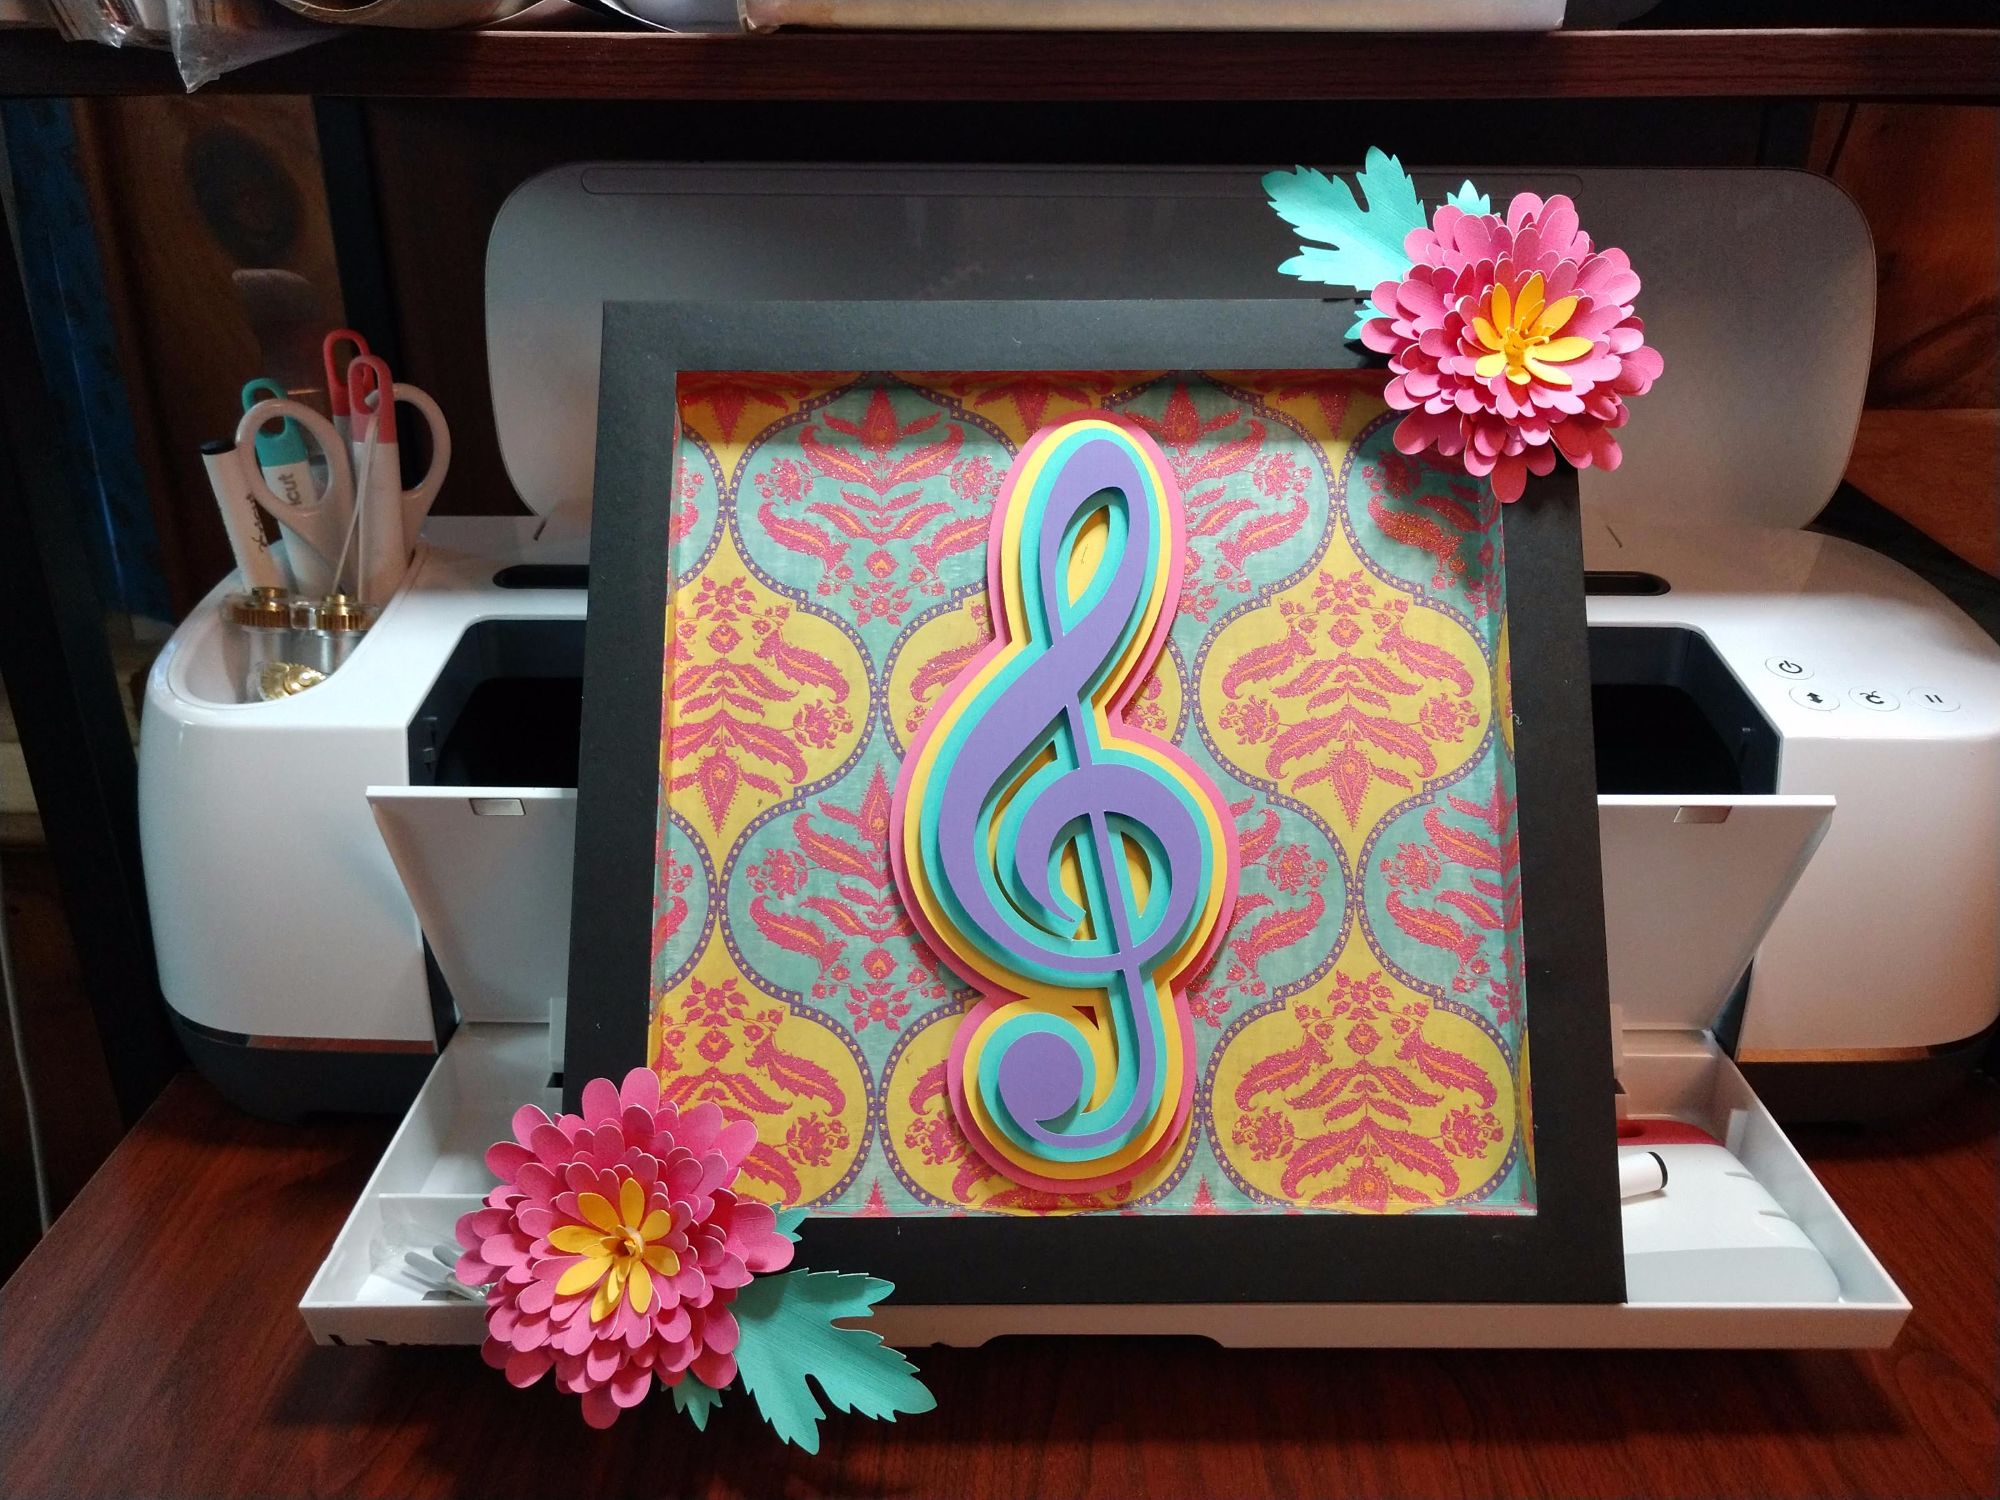 Treble clef within a frame in bright colors of purple, teal, gold, and pink, with two large pink flowers at upper right and lower left on frame